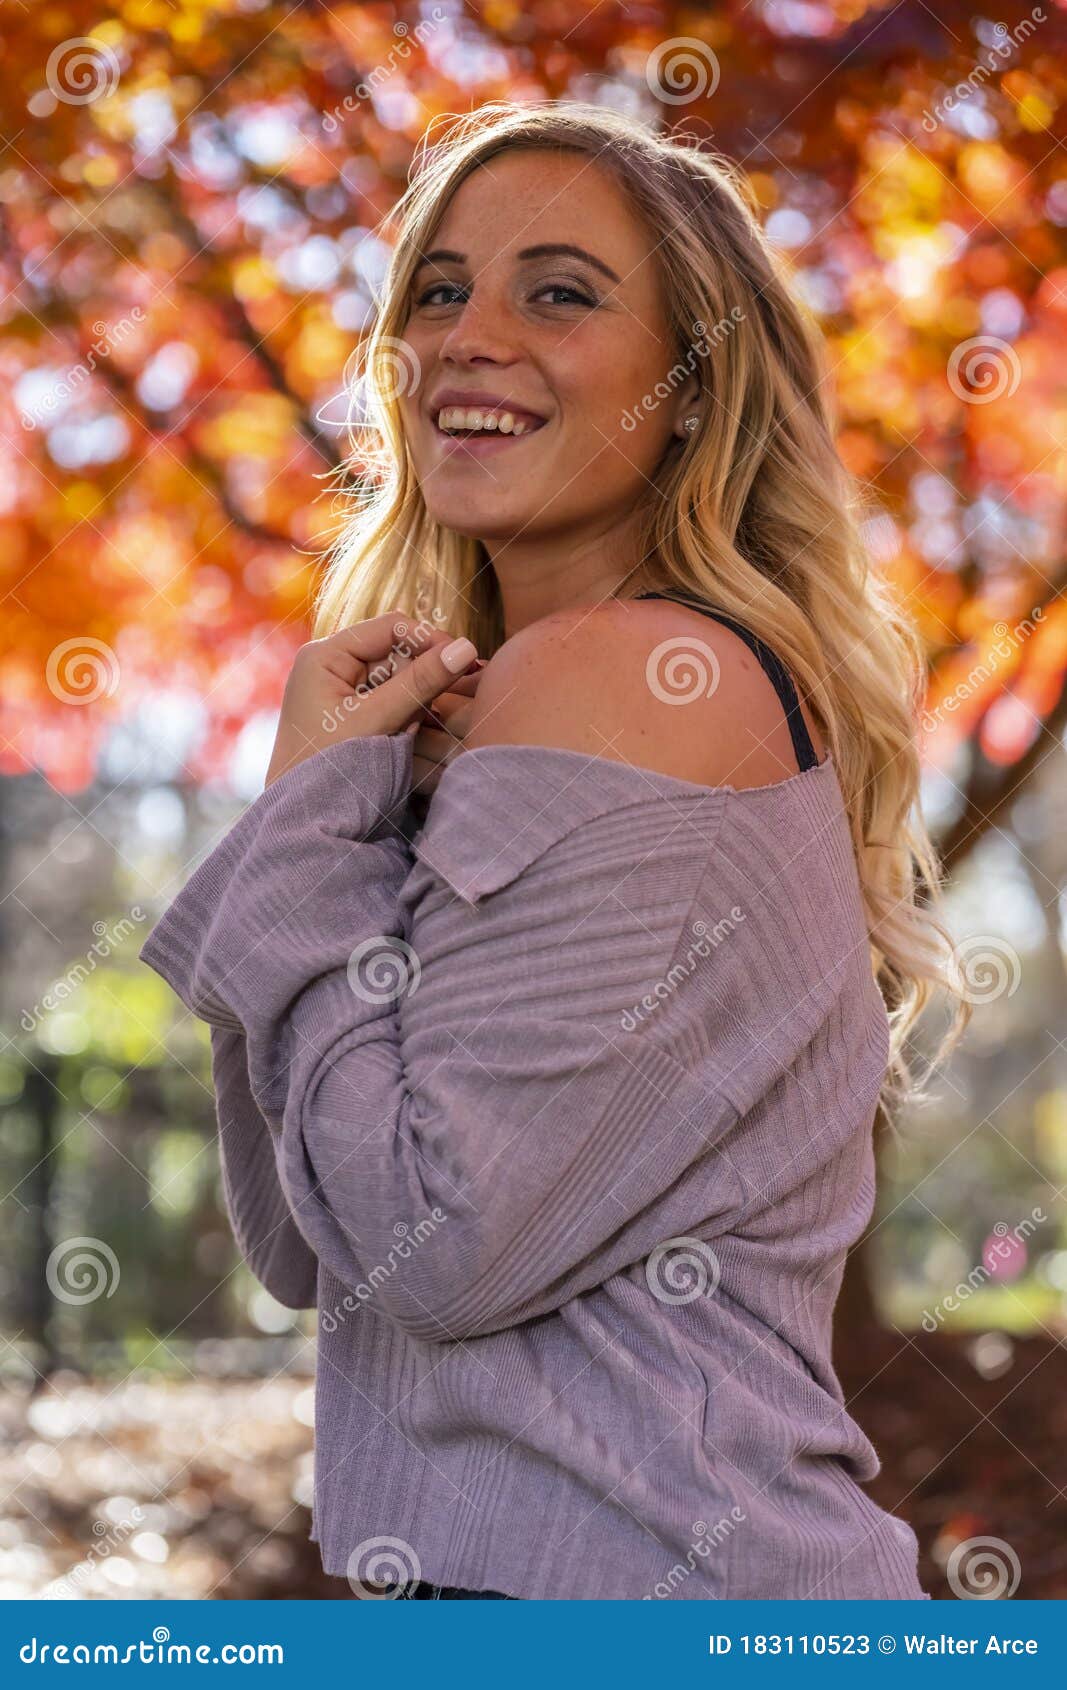 A Lovely Blonde Model Enjoys An Autumn Day Outdoors At The Park Stock Image Image Of Cute